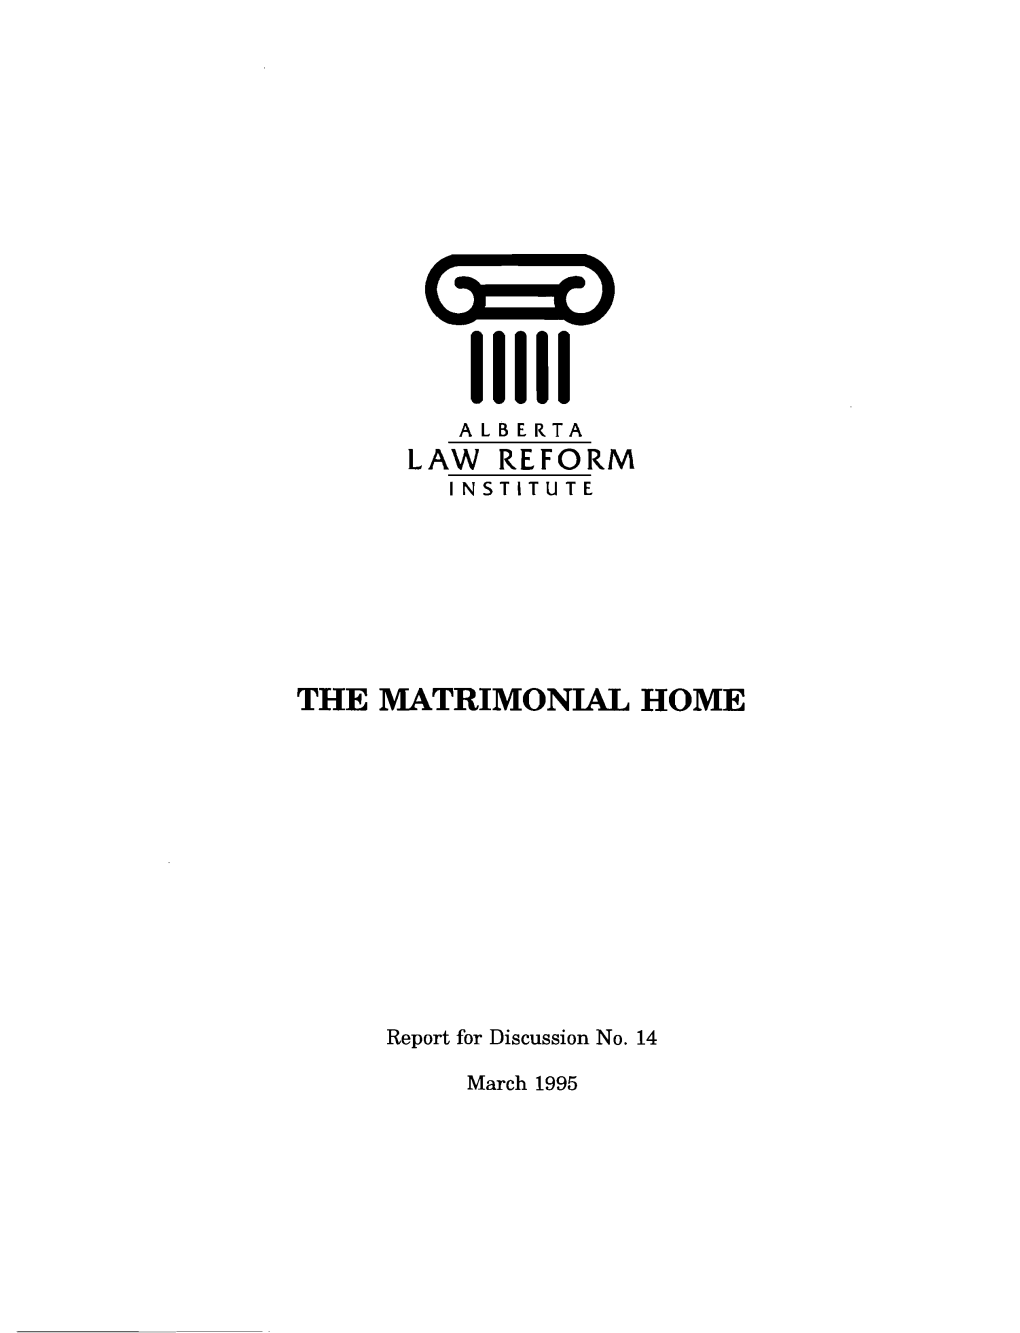 'Homestead' Under the Dower Act and 'Matrimonial Home' Under the Matrimonial Property Act Should Be Replaced by a Single Definition